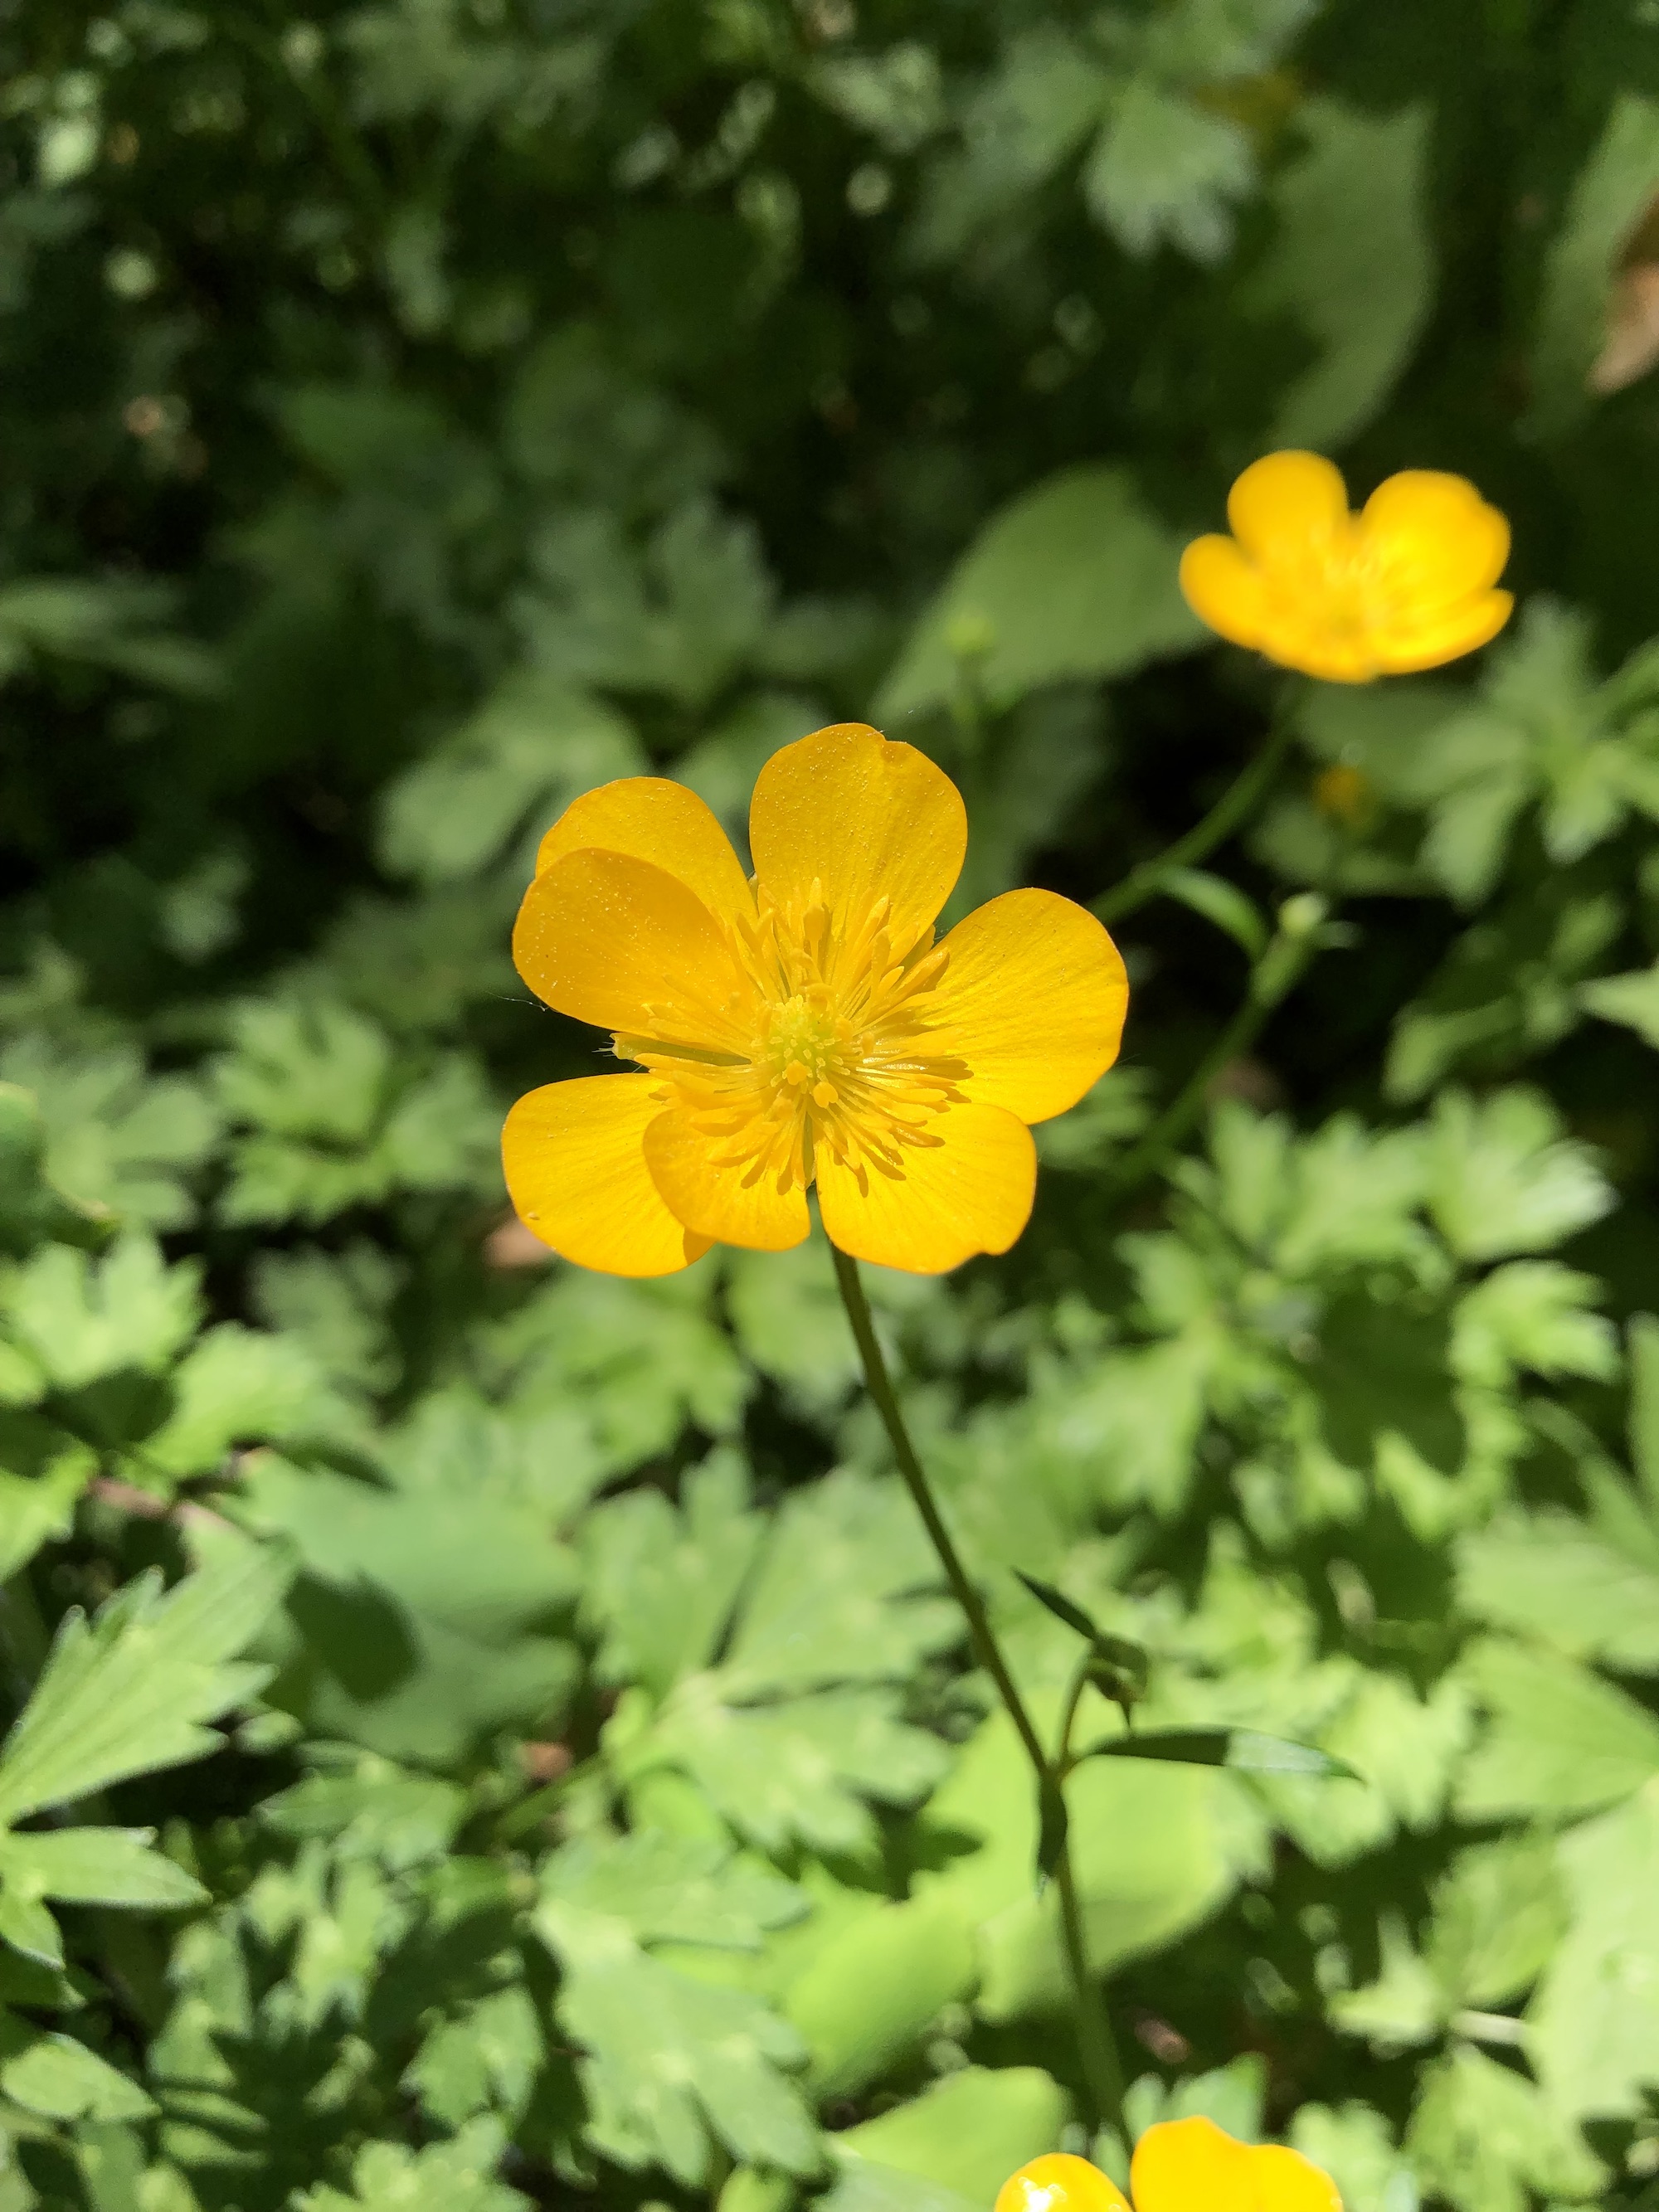 Creeping Buttercup in a grassy clearing along the bike path between Odana Road and Midvale Boulevard in Madison, Wisconsin on June 3, 2022.